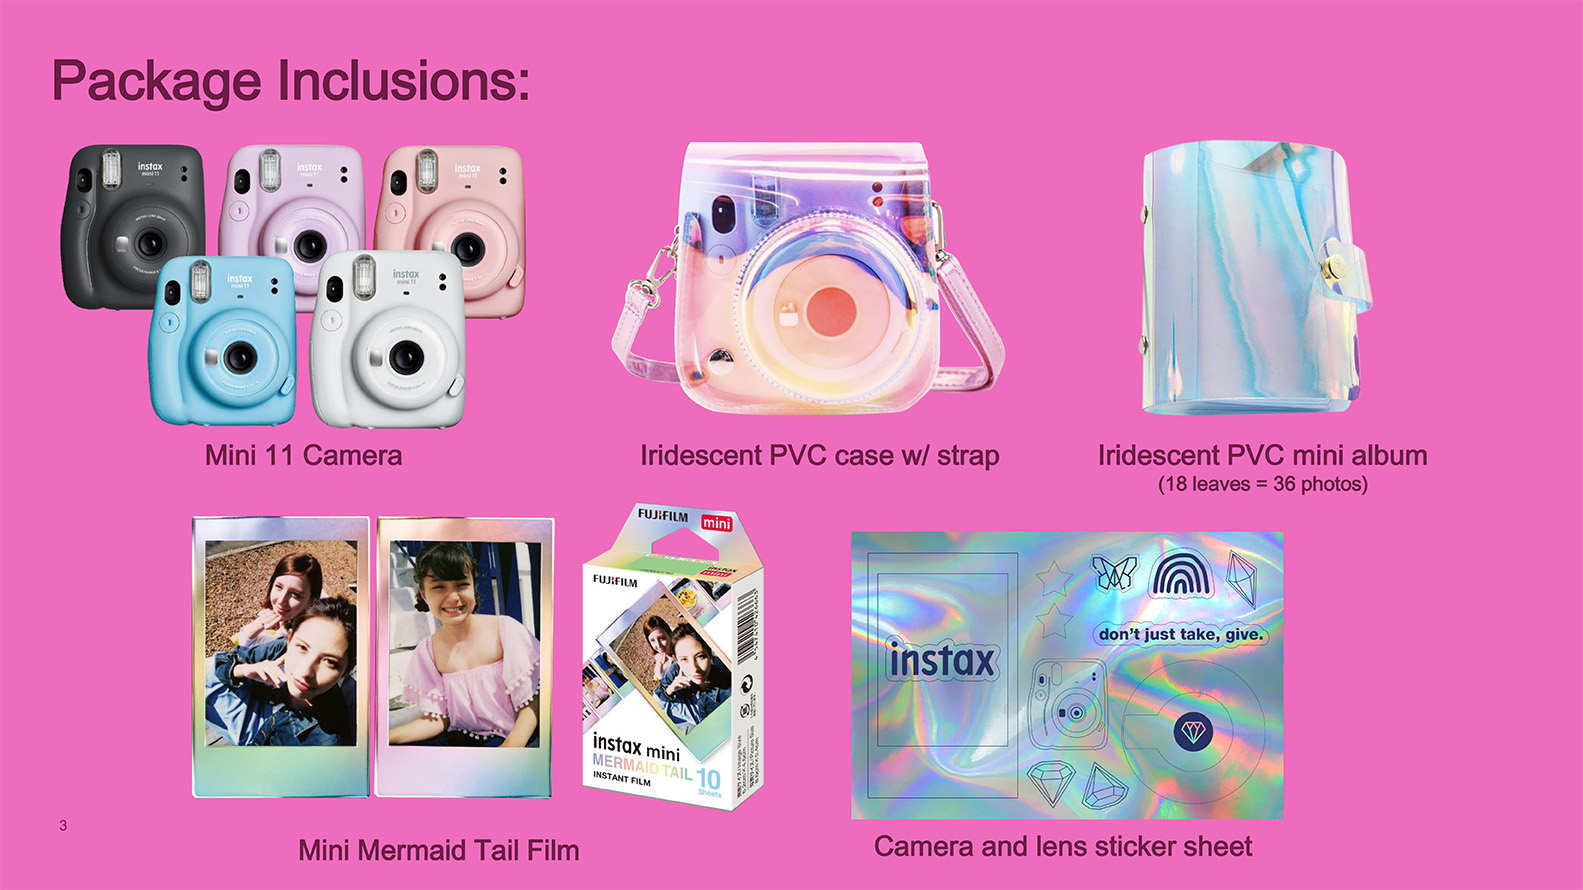 New Style Fujifilm Instax Mini 11 Instant Camera Blush Pink / Sky Blue /  Charcoal Gray / Ice White / Lilac Purple 5 Colors